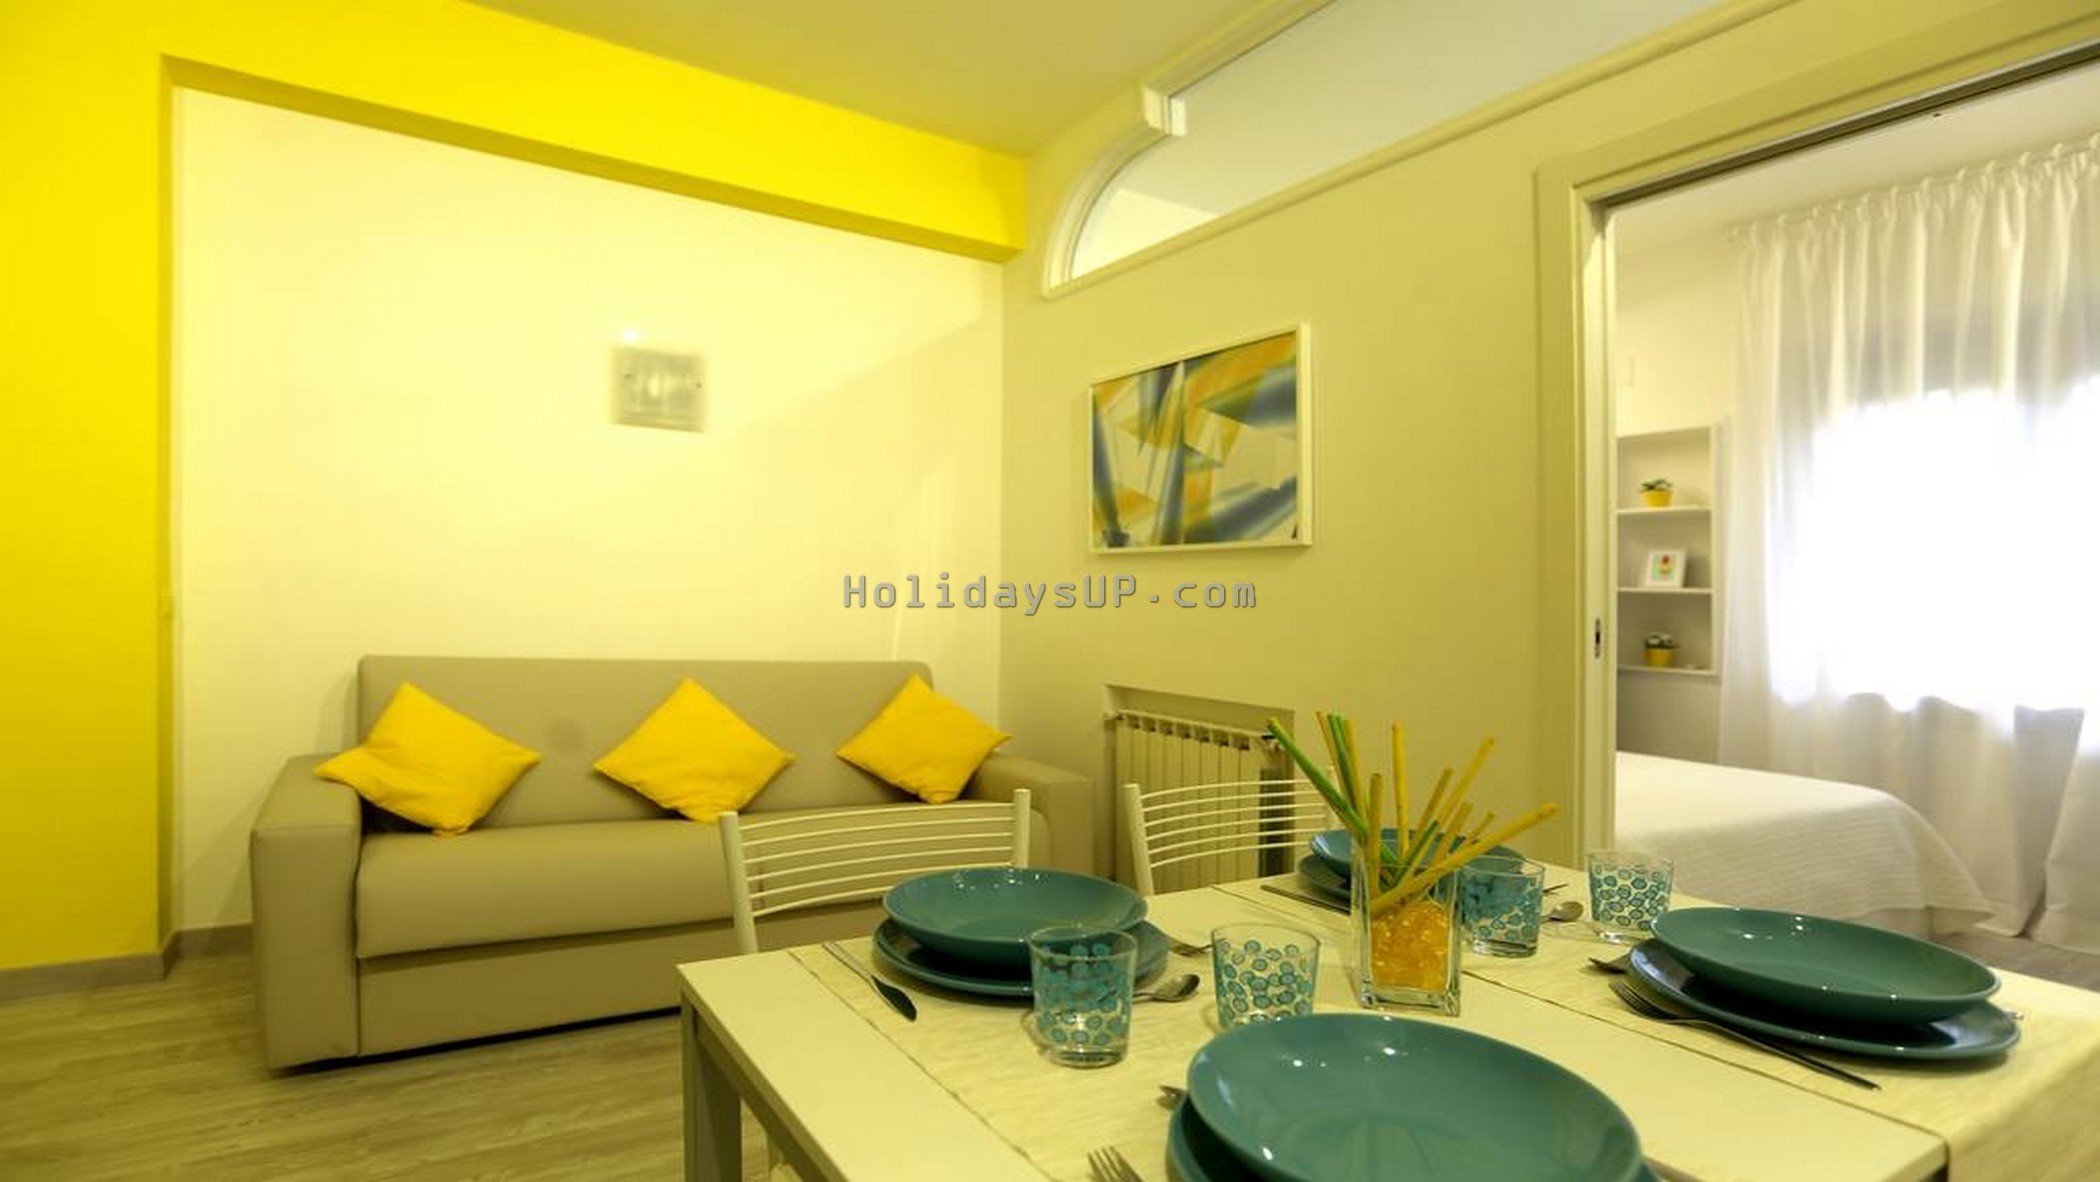 Living-dining area with double sofabed Mariandre B sorrentoapartment